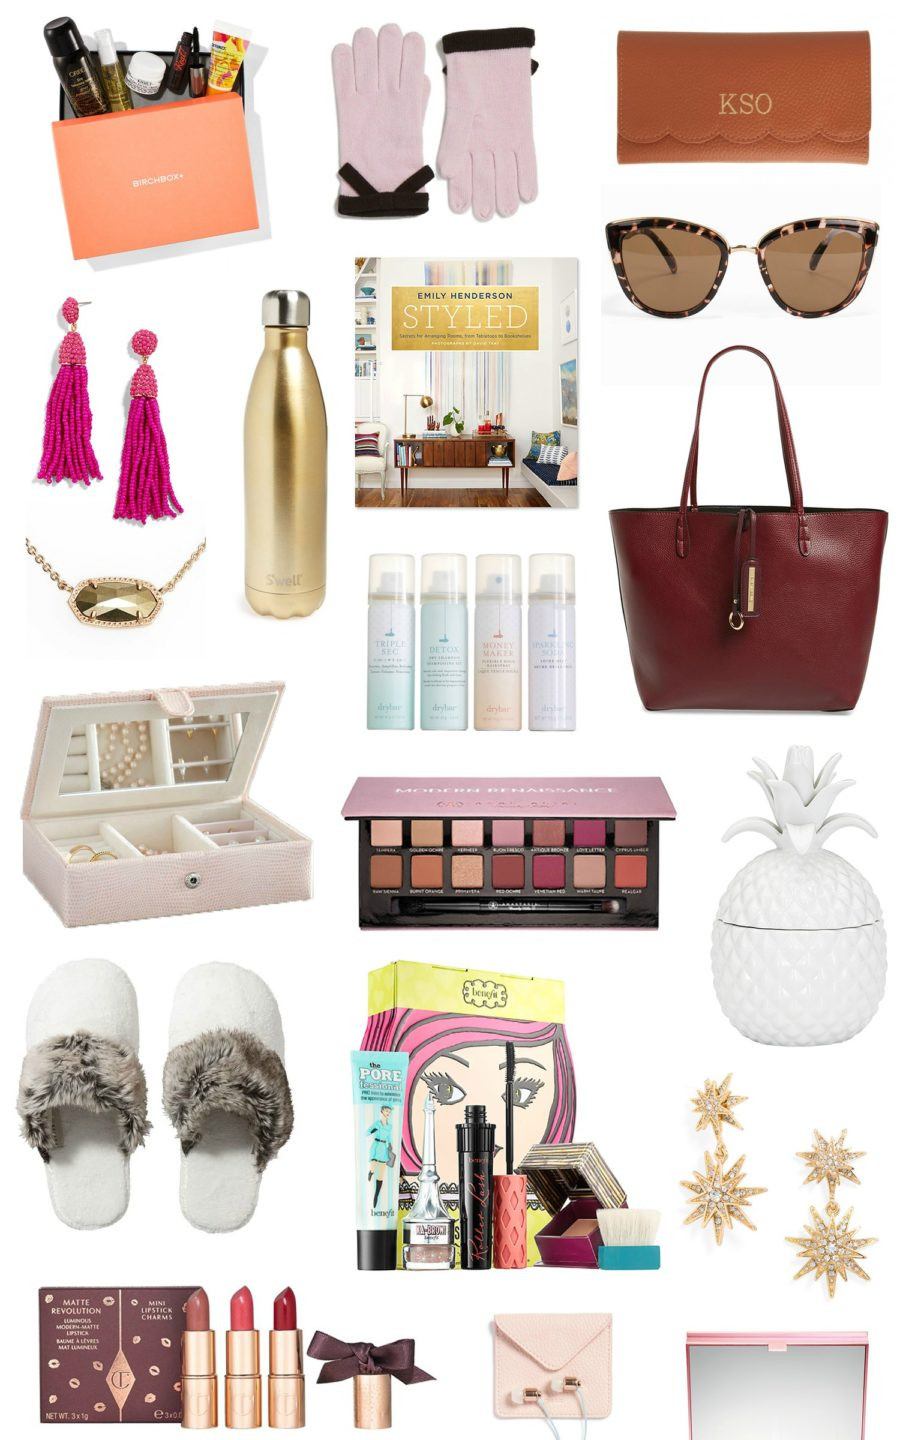 Ladies Christmas Gift Ideas
 The Best Christmas Gift Ideas for Women under $50